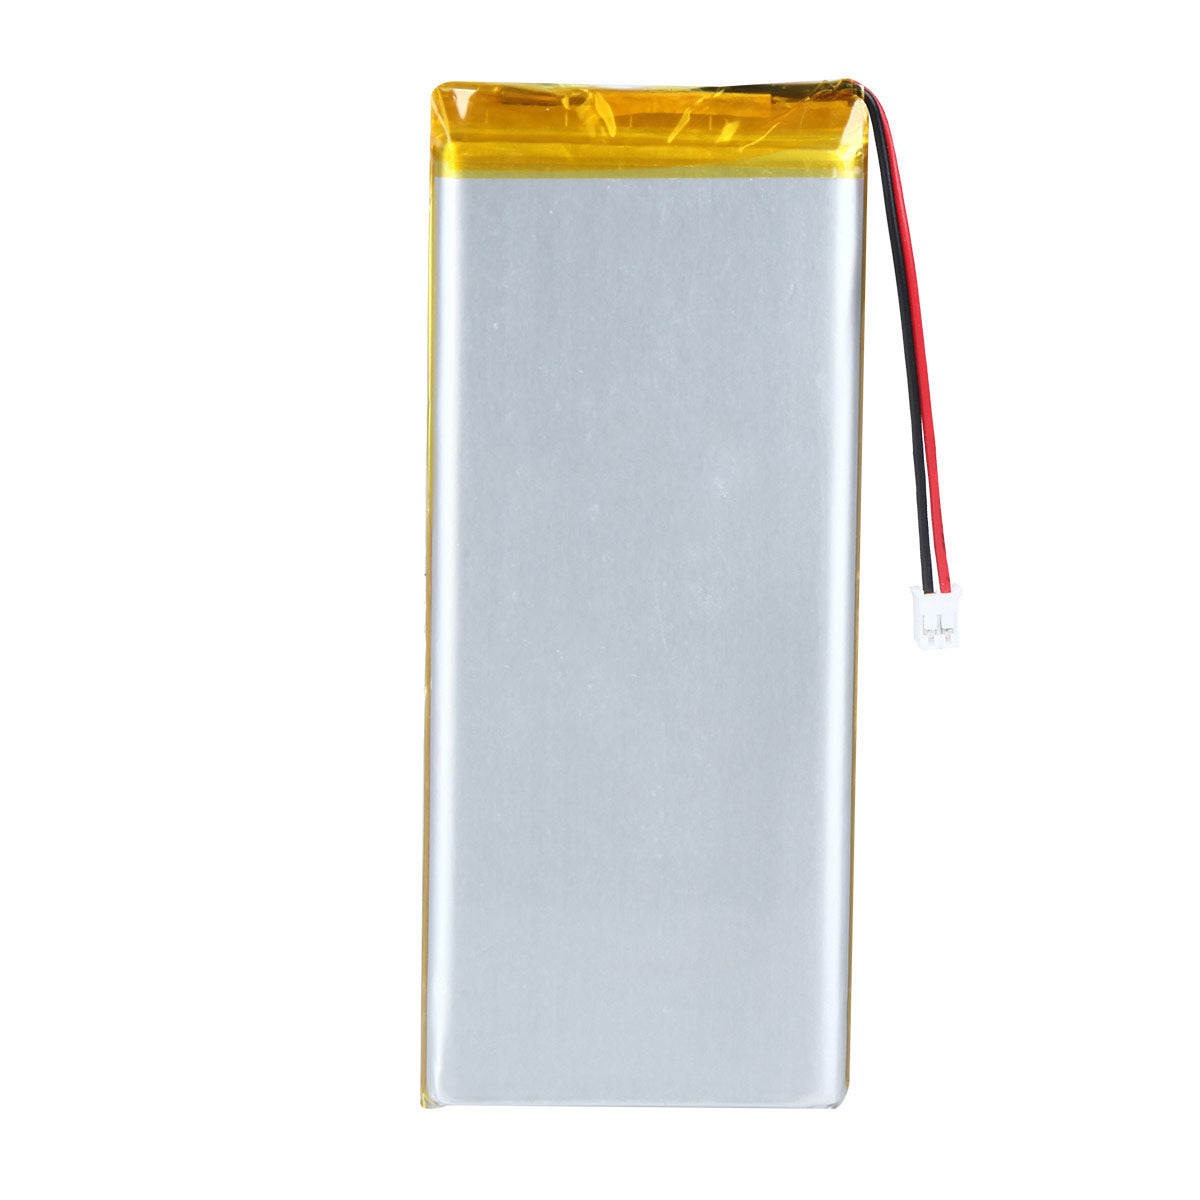 3.7V 5800mAh 8050115 Rechargeable Lithium Polymer Battery